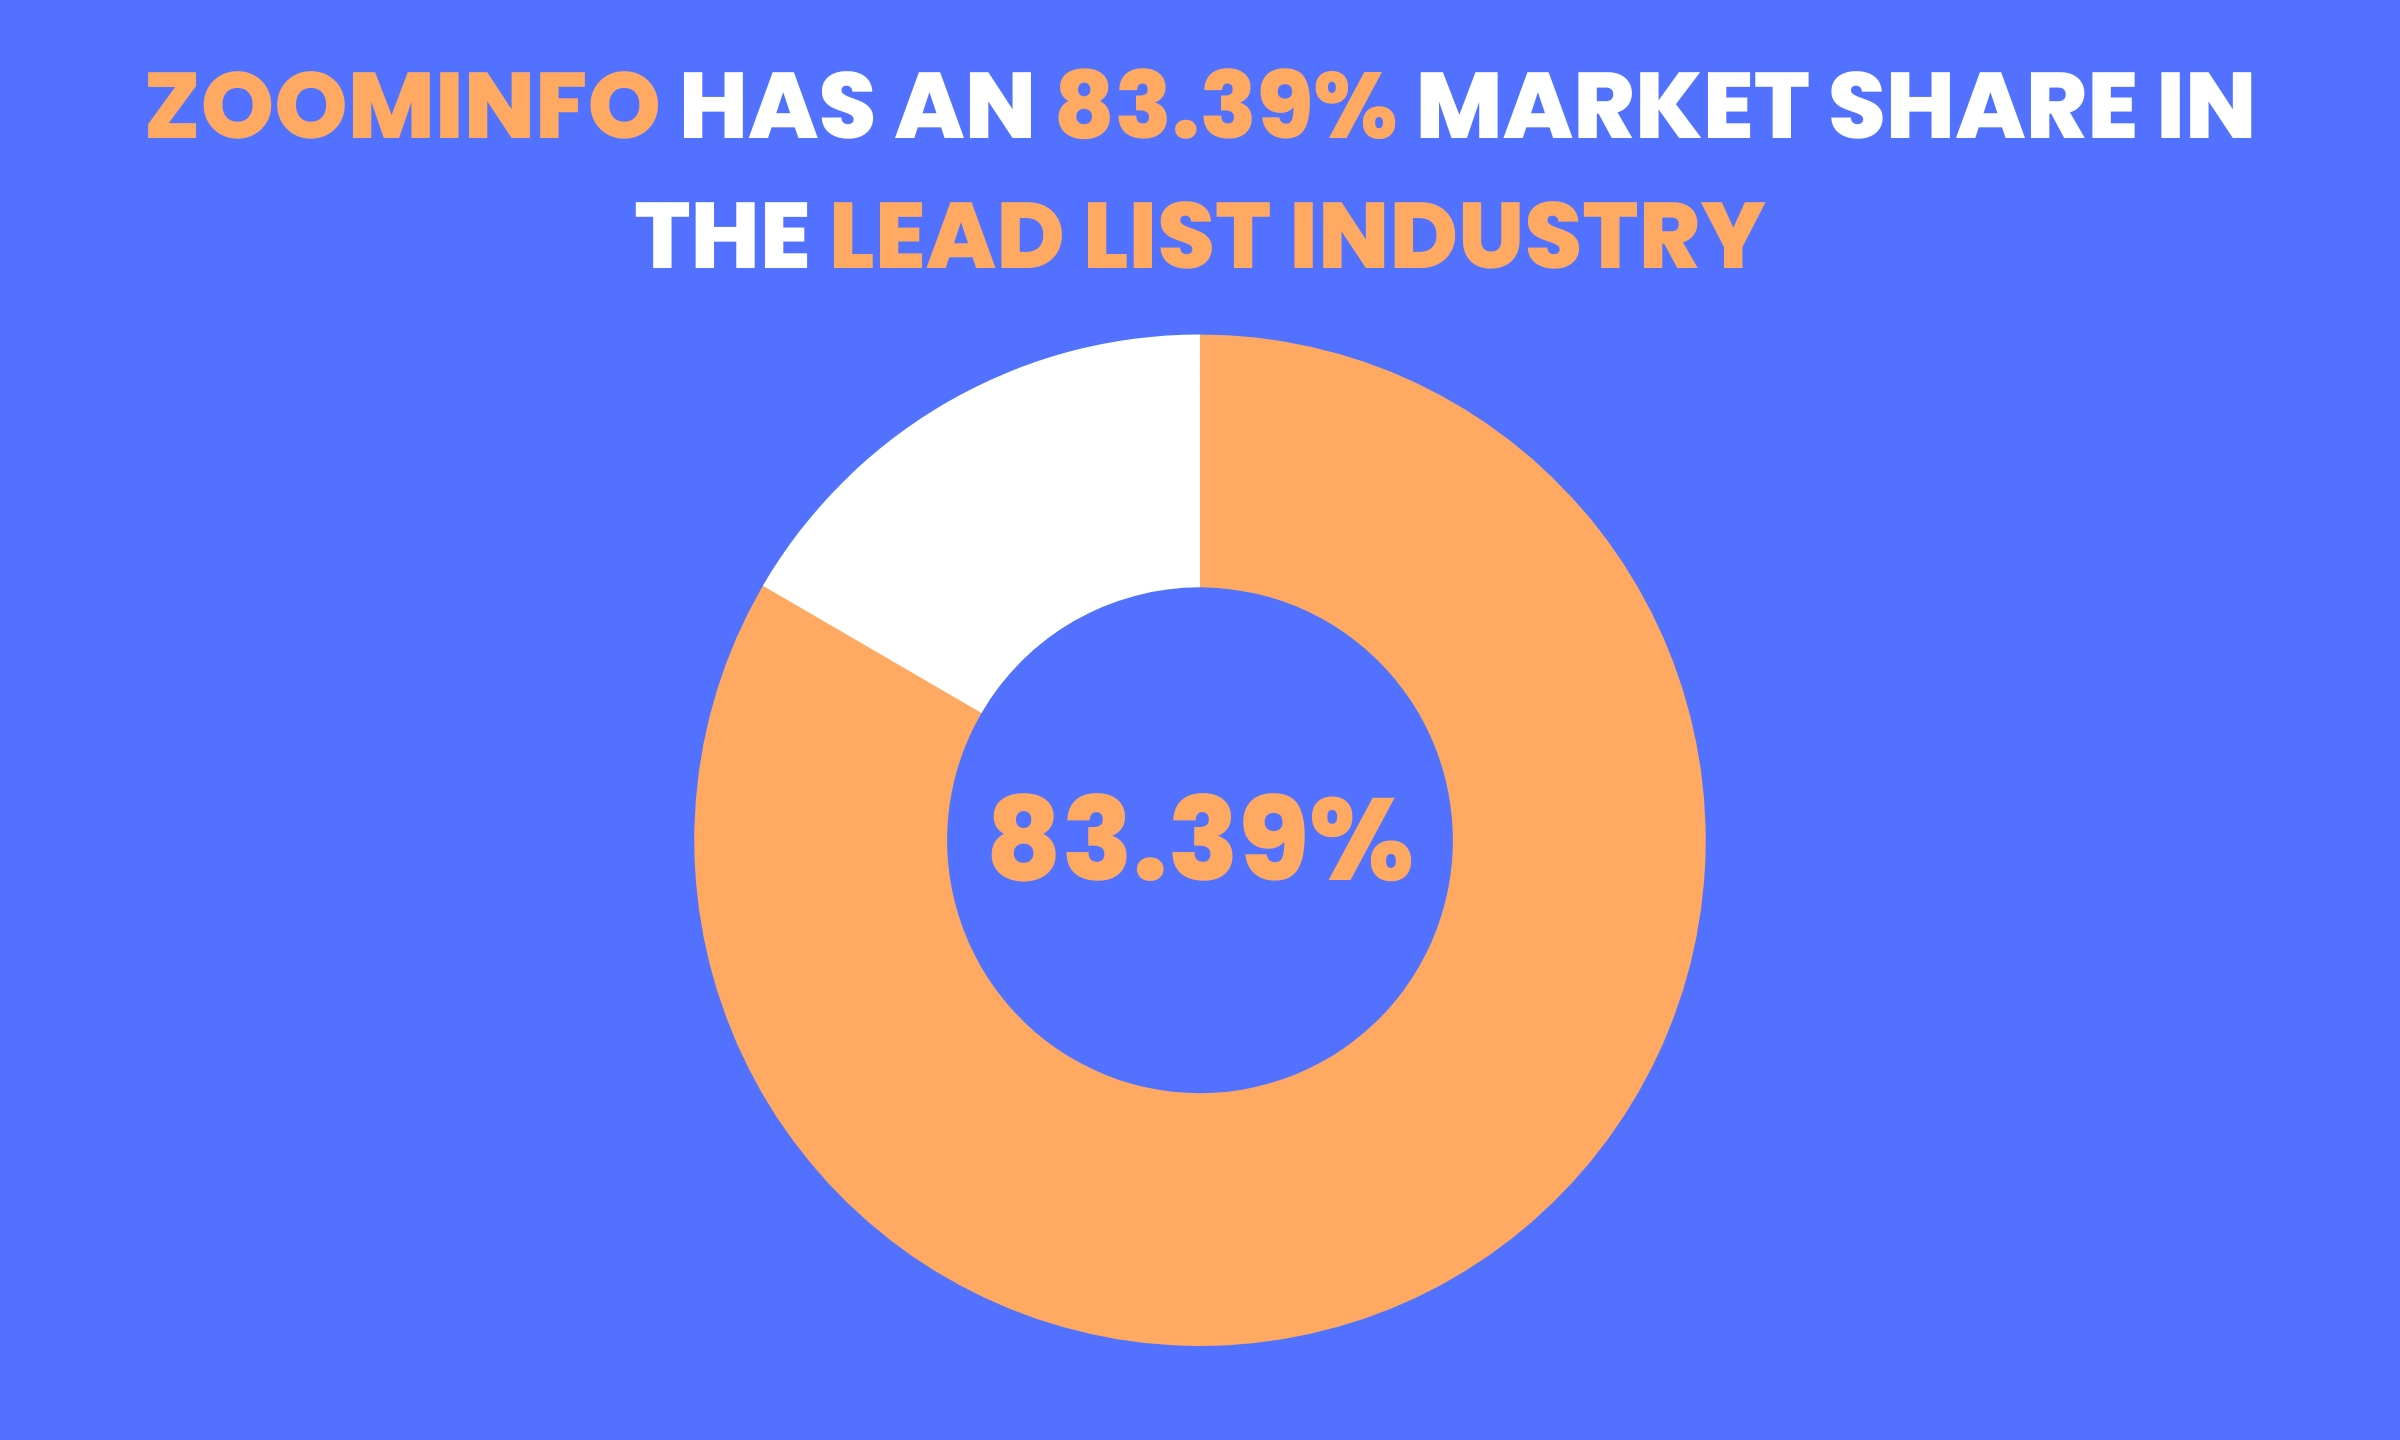 ZoomInfo's market share which is 83.39 in the lead list industry